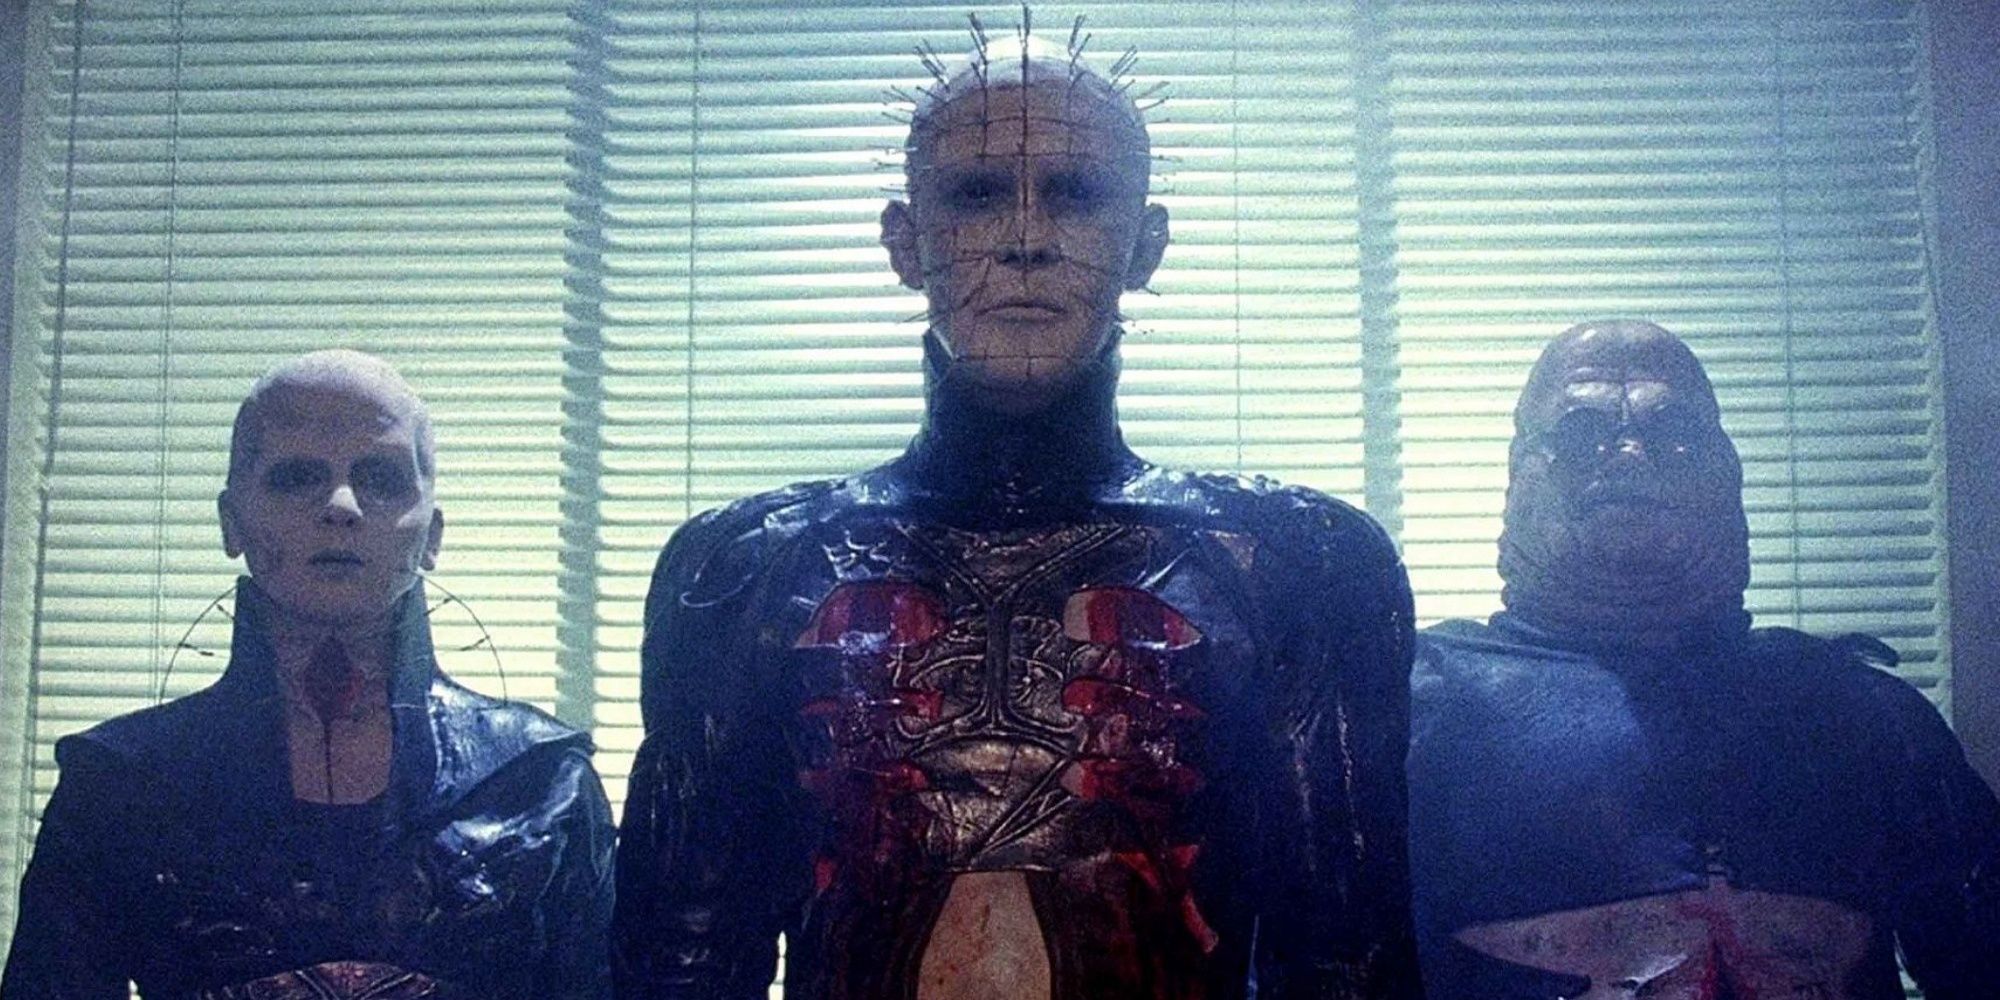 Pinhead and two other cenobites in Hellraiser